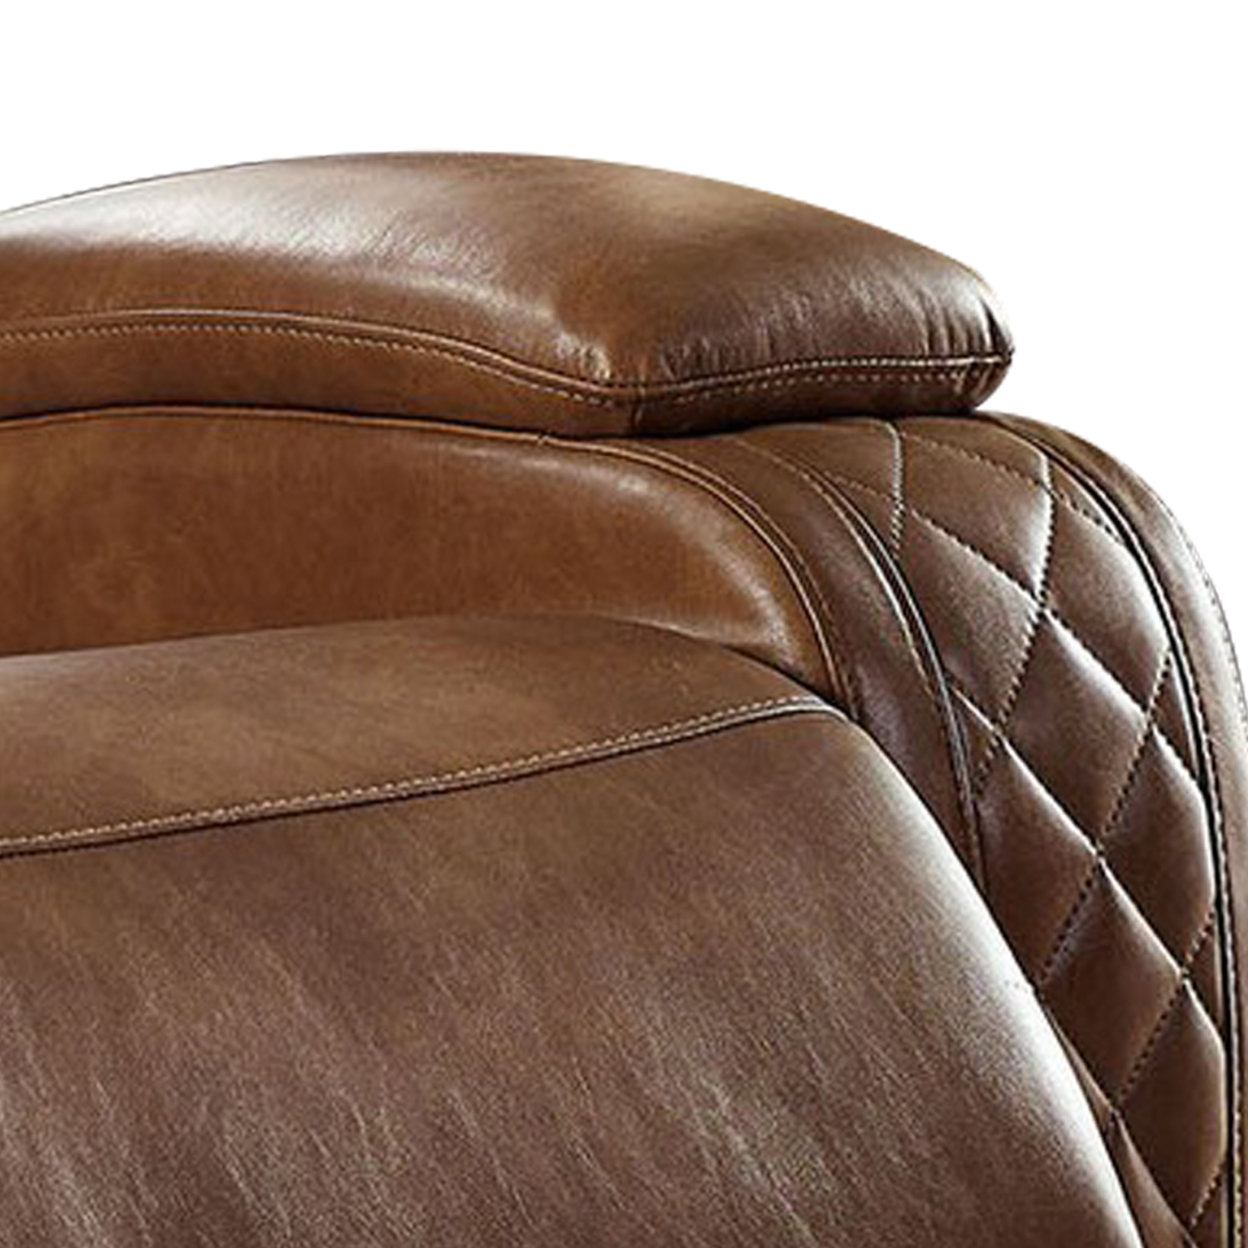 Leatherette Power Recliner With Stitched Diamond Pattern, Brown- Saltoro Sherpi